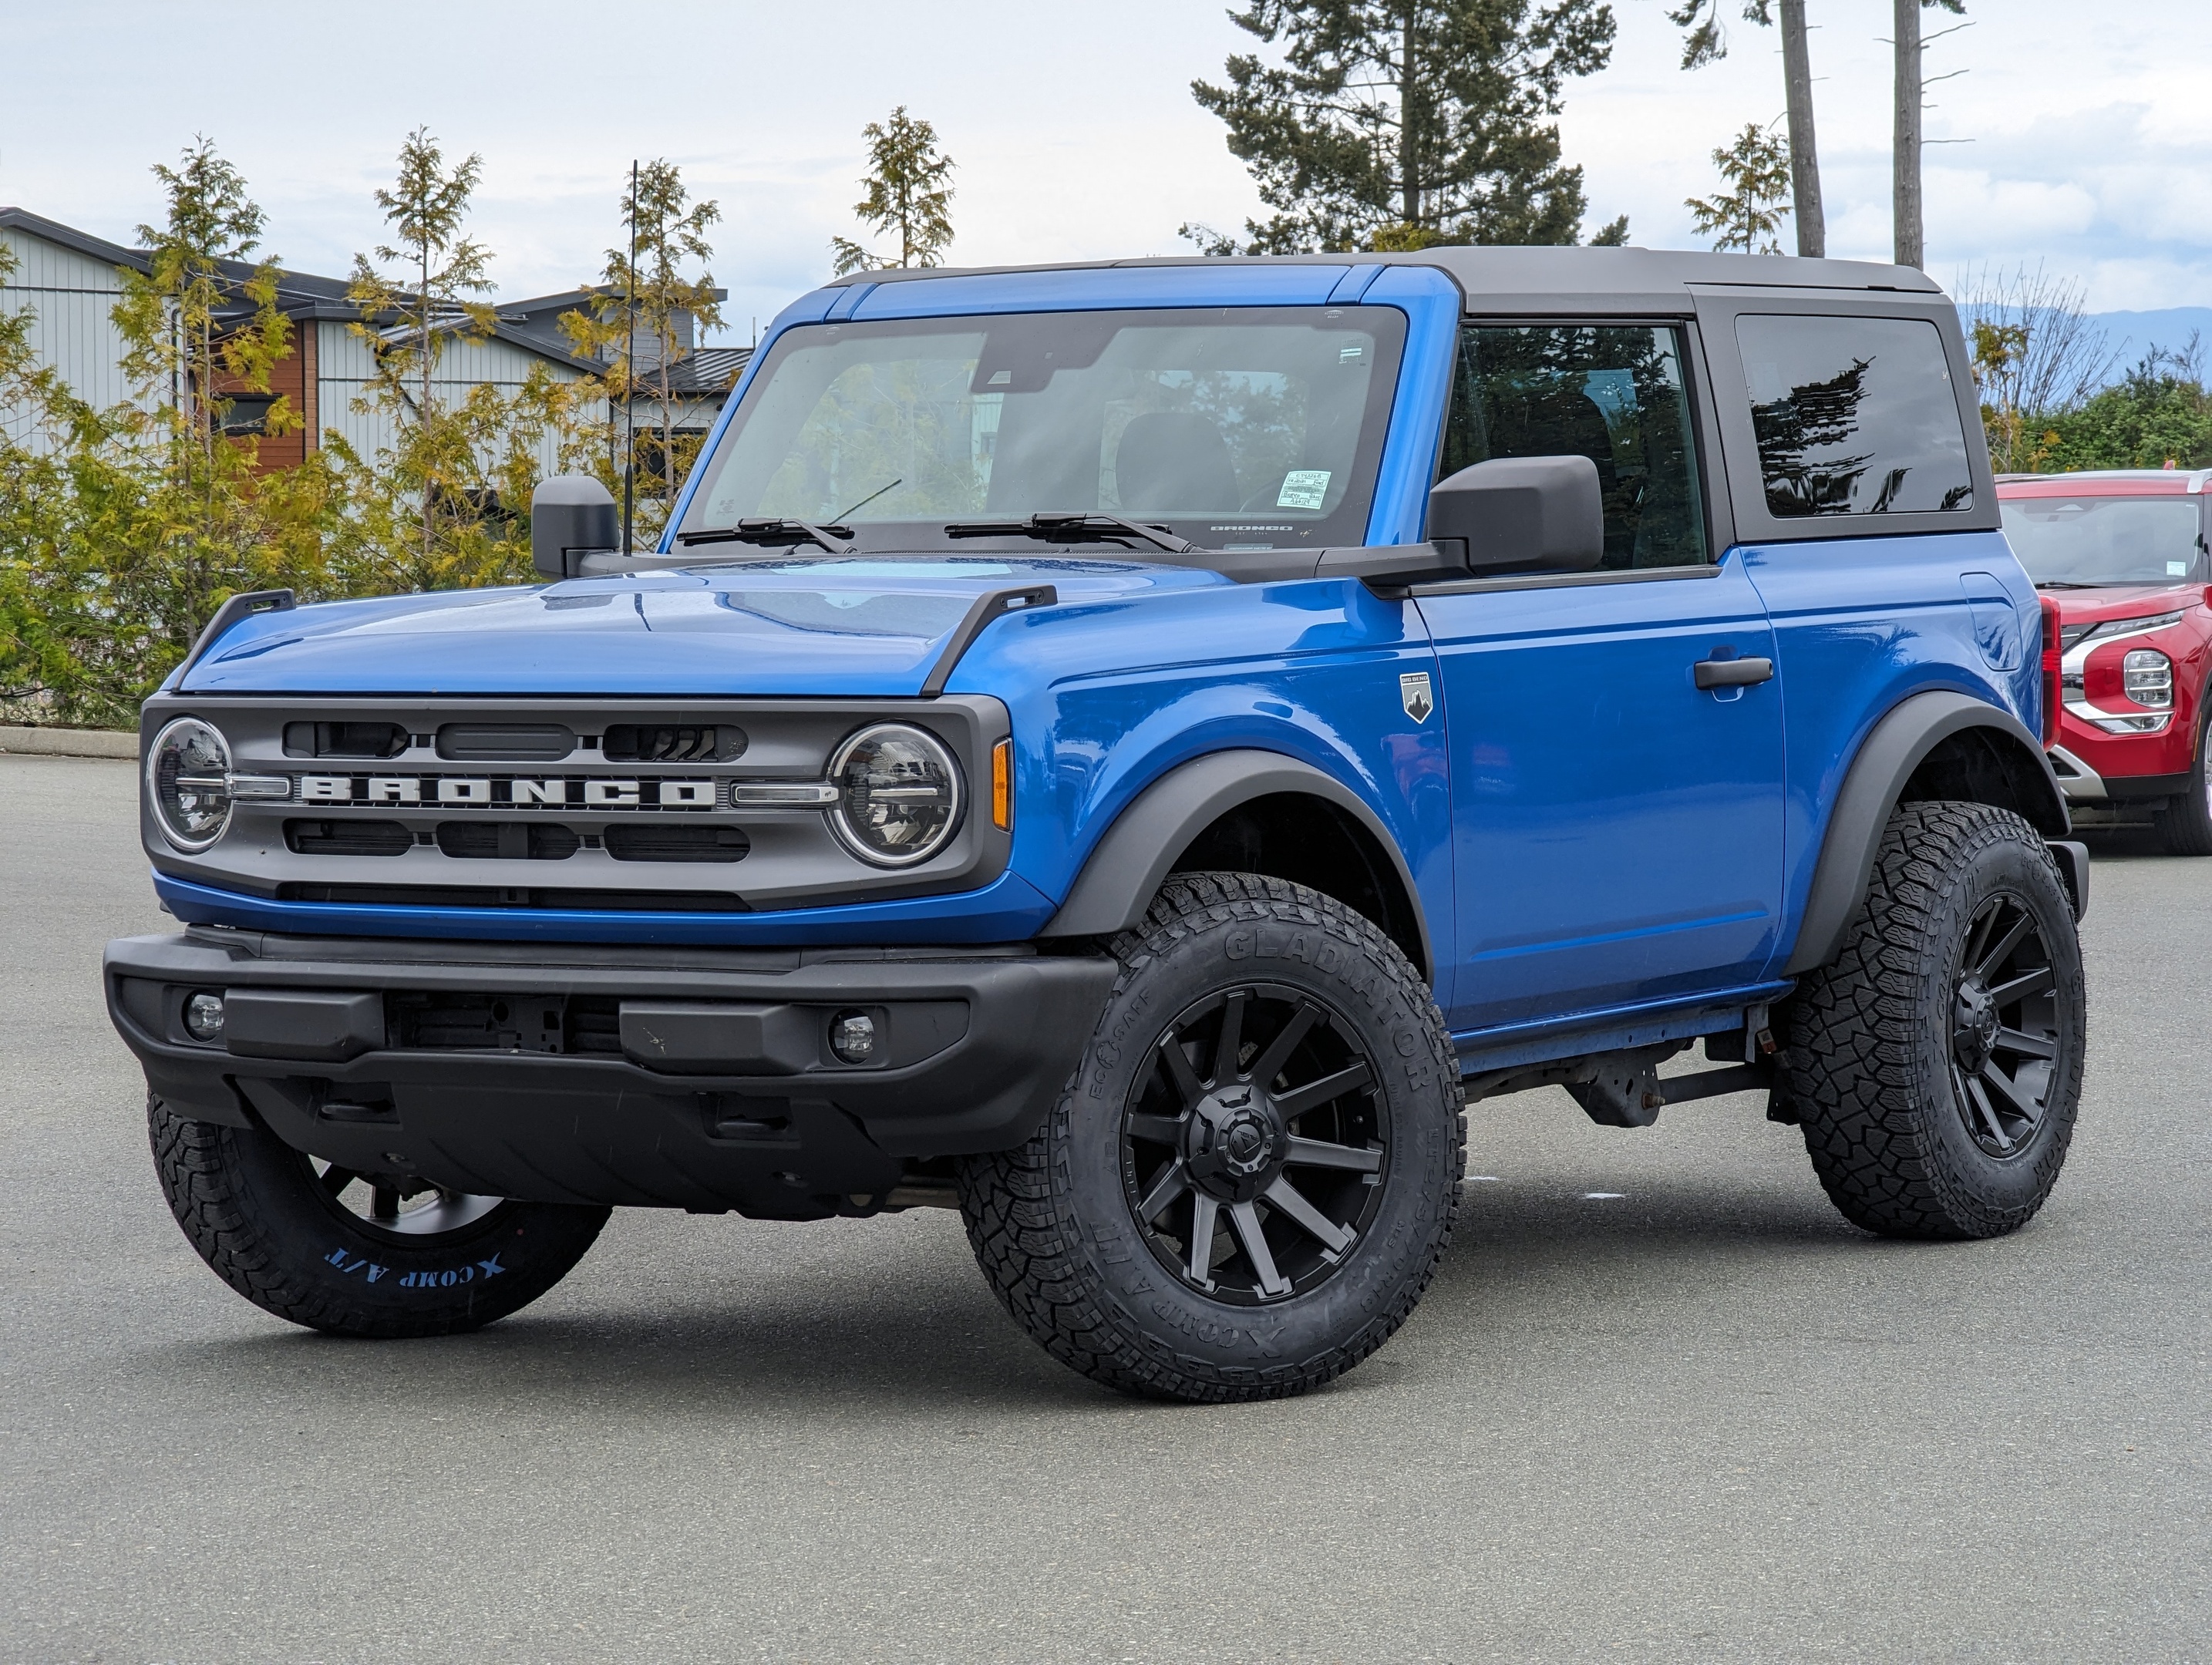 2021 Ford Bronco - No Accidents, Manual, Heated Seats